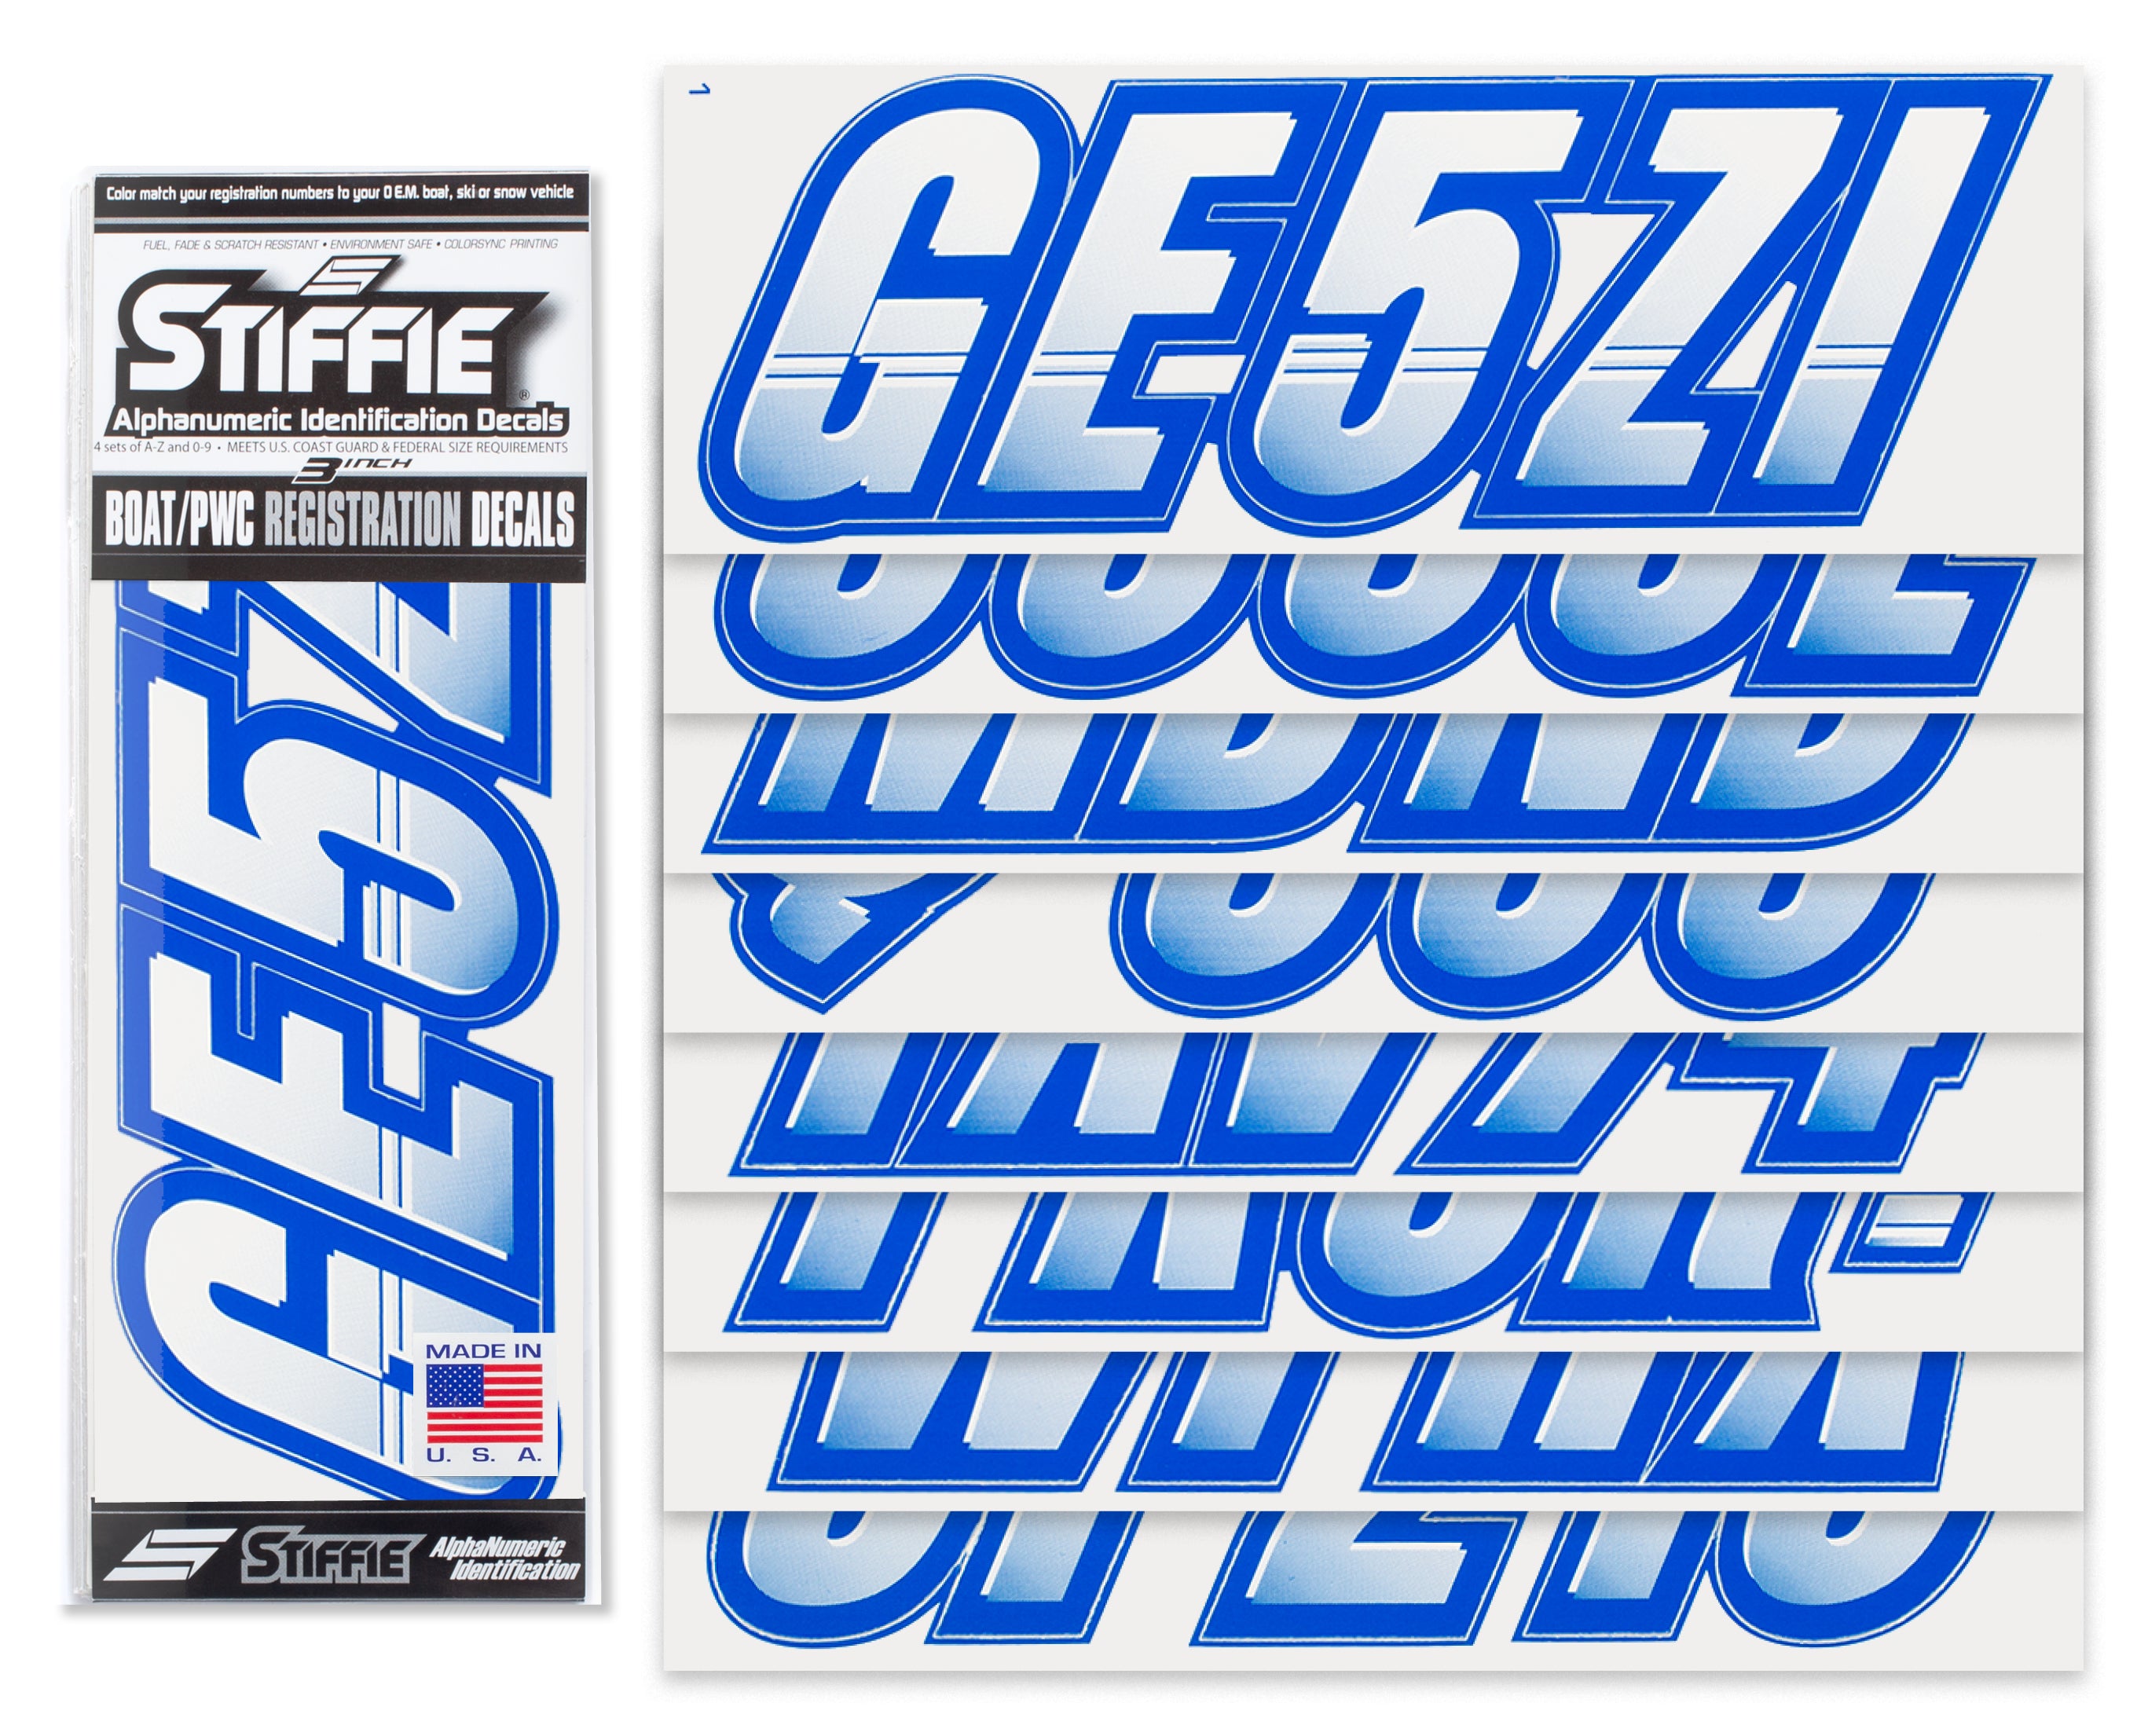 STIFFIE Techtron White/Blue 3" Alpha-Numeric Registration Identification Numbers Stickers Decals for Boats & Personal Watercraft